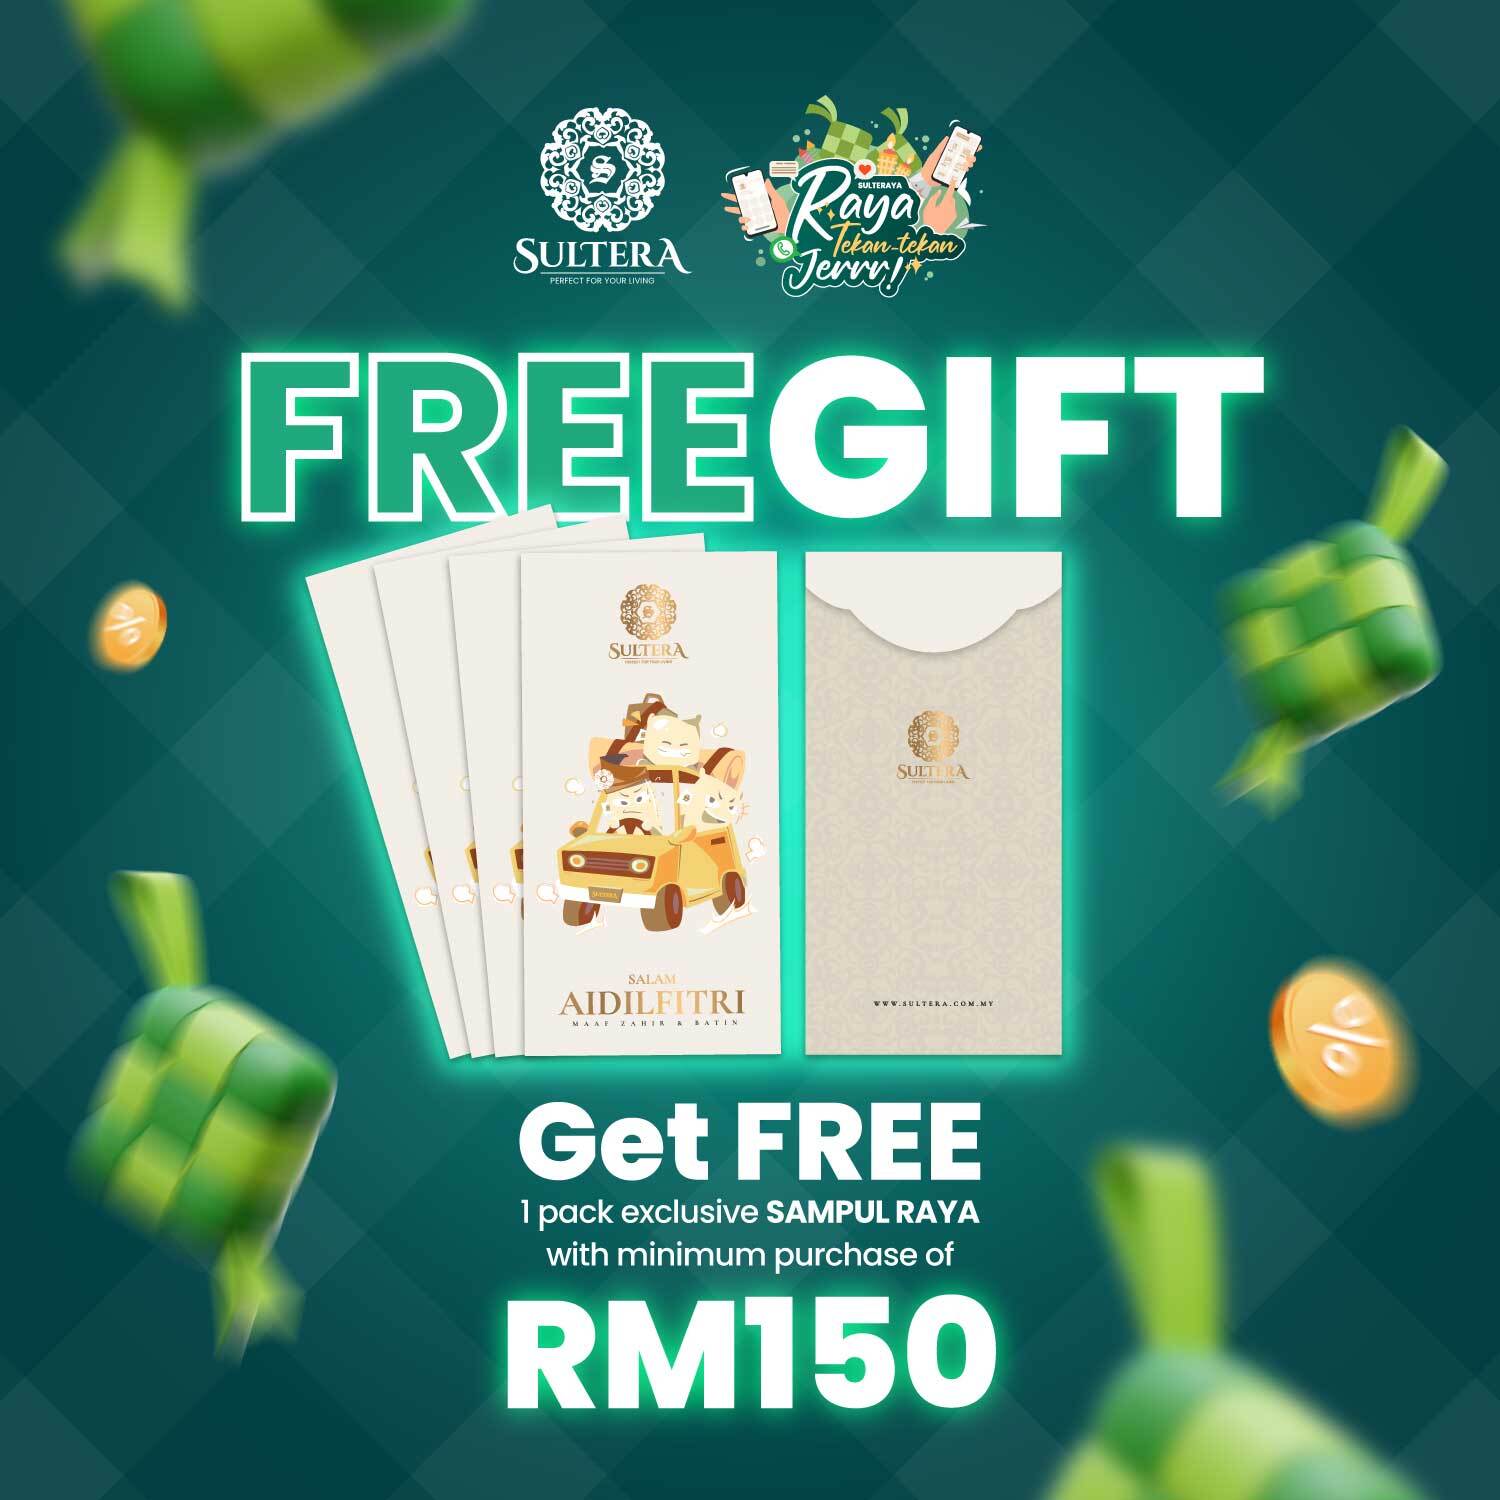 Free-Gift-Poster-03